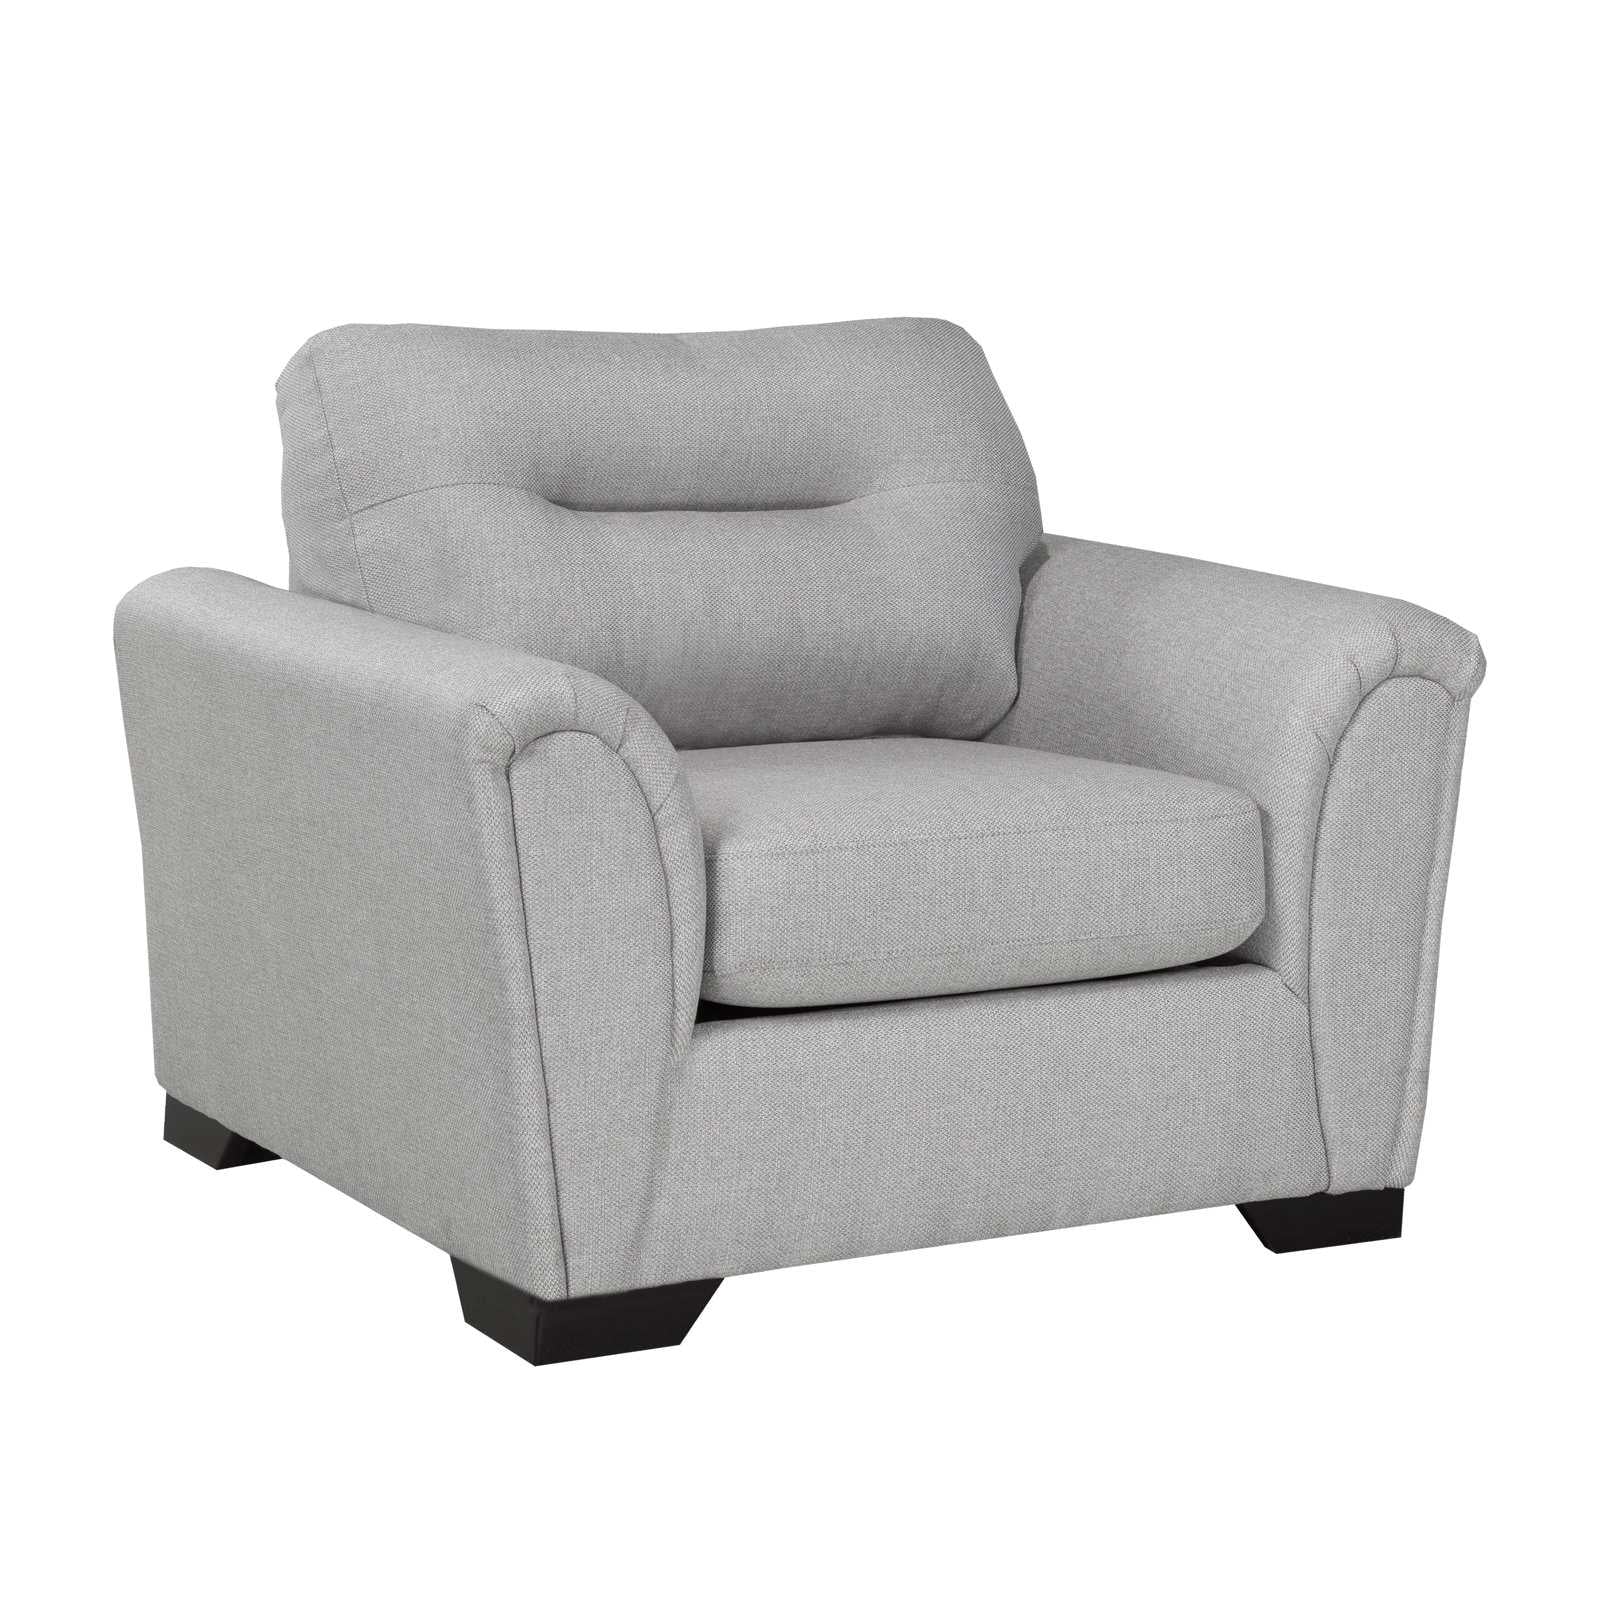 Canadian Made Zesus Silver Sofa Collection 9559